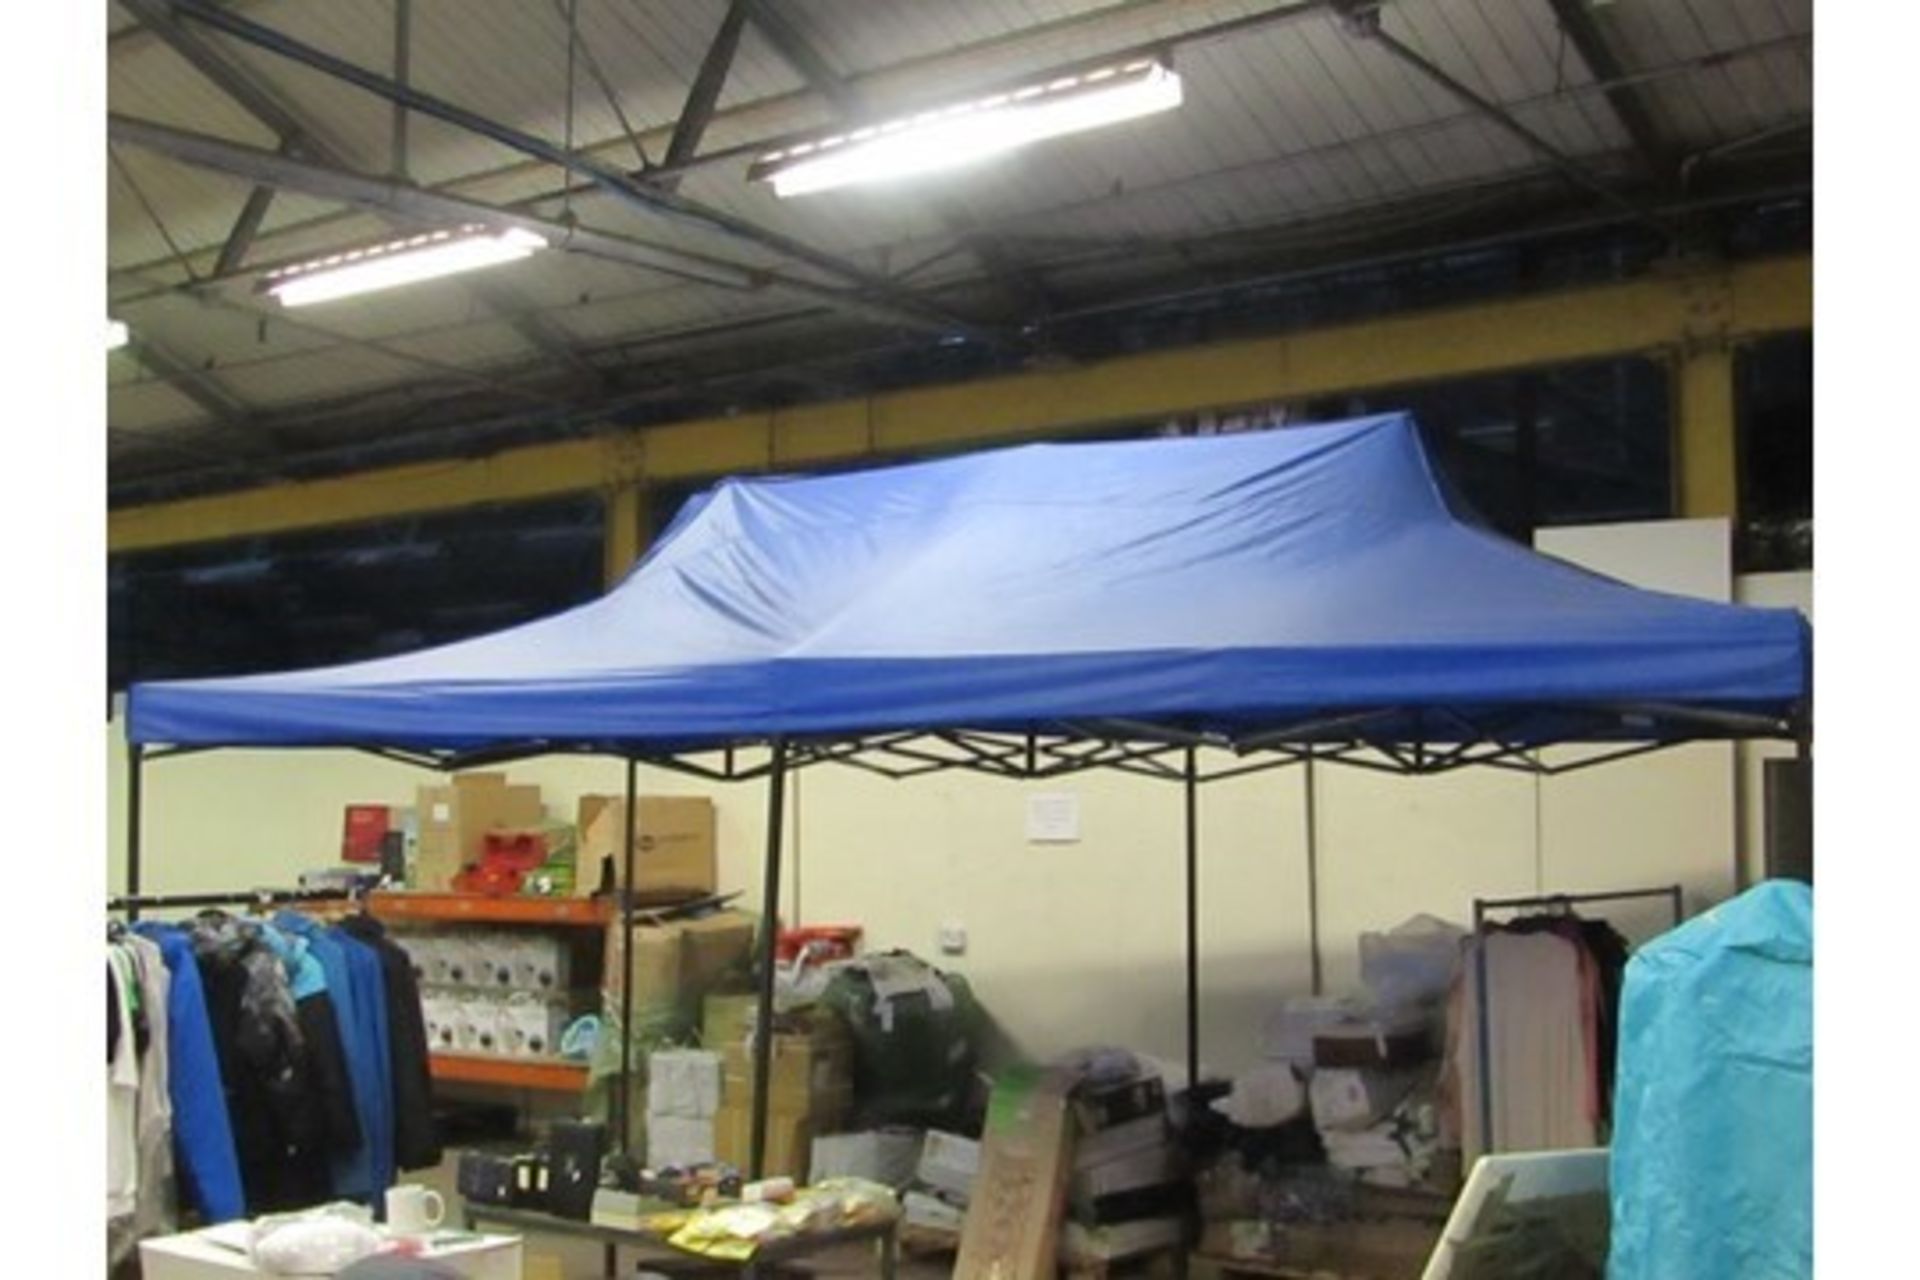 Pop Up 6mtr x 3mtr commercial quality gazebo with Red fabric cover in carry bag, new, RRP Circa £